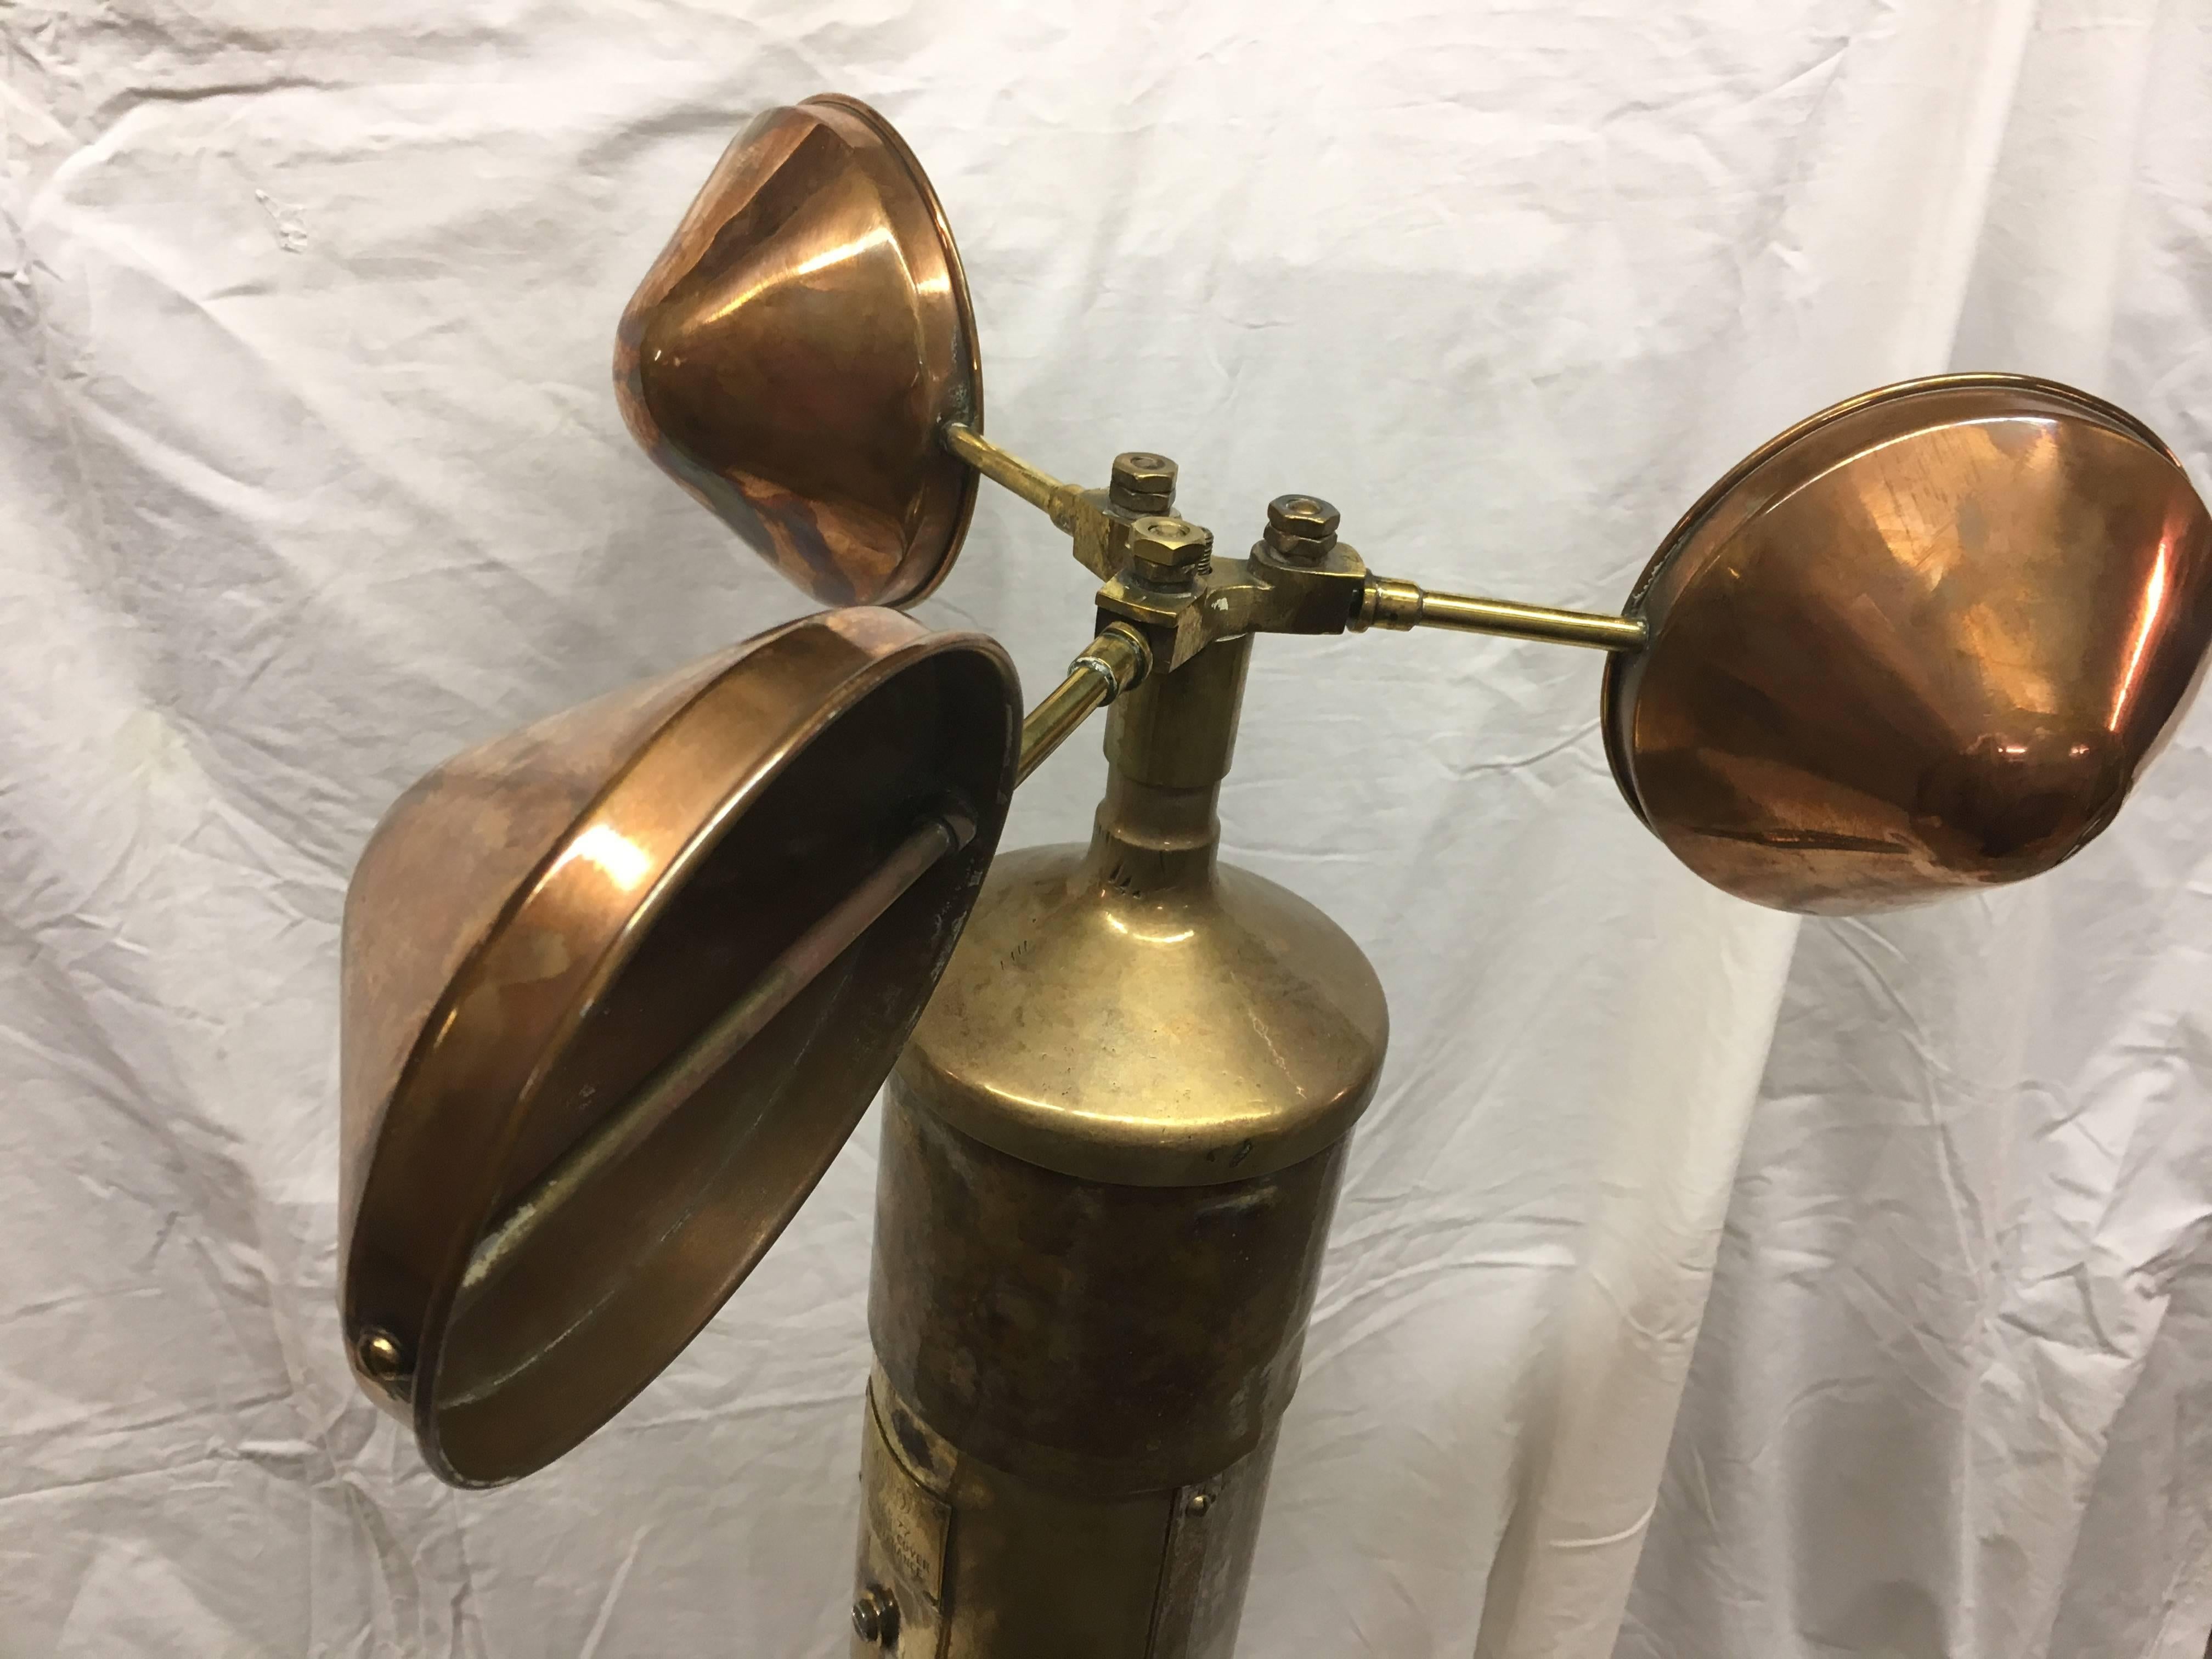 Industrial Rare Copper and Brass Ship's Anemometer Signed by Munro from London, 1970s